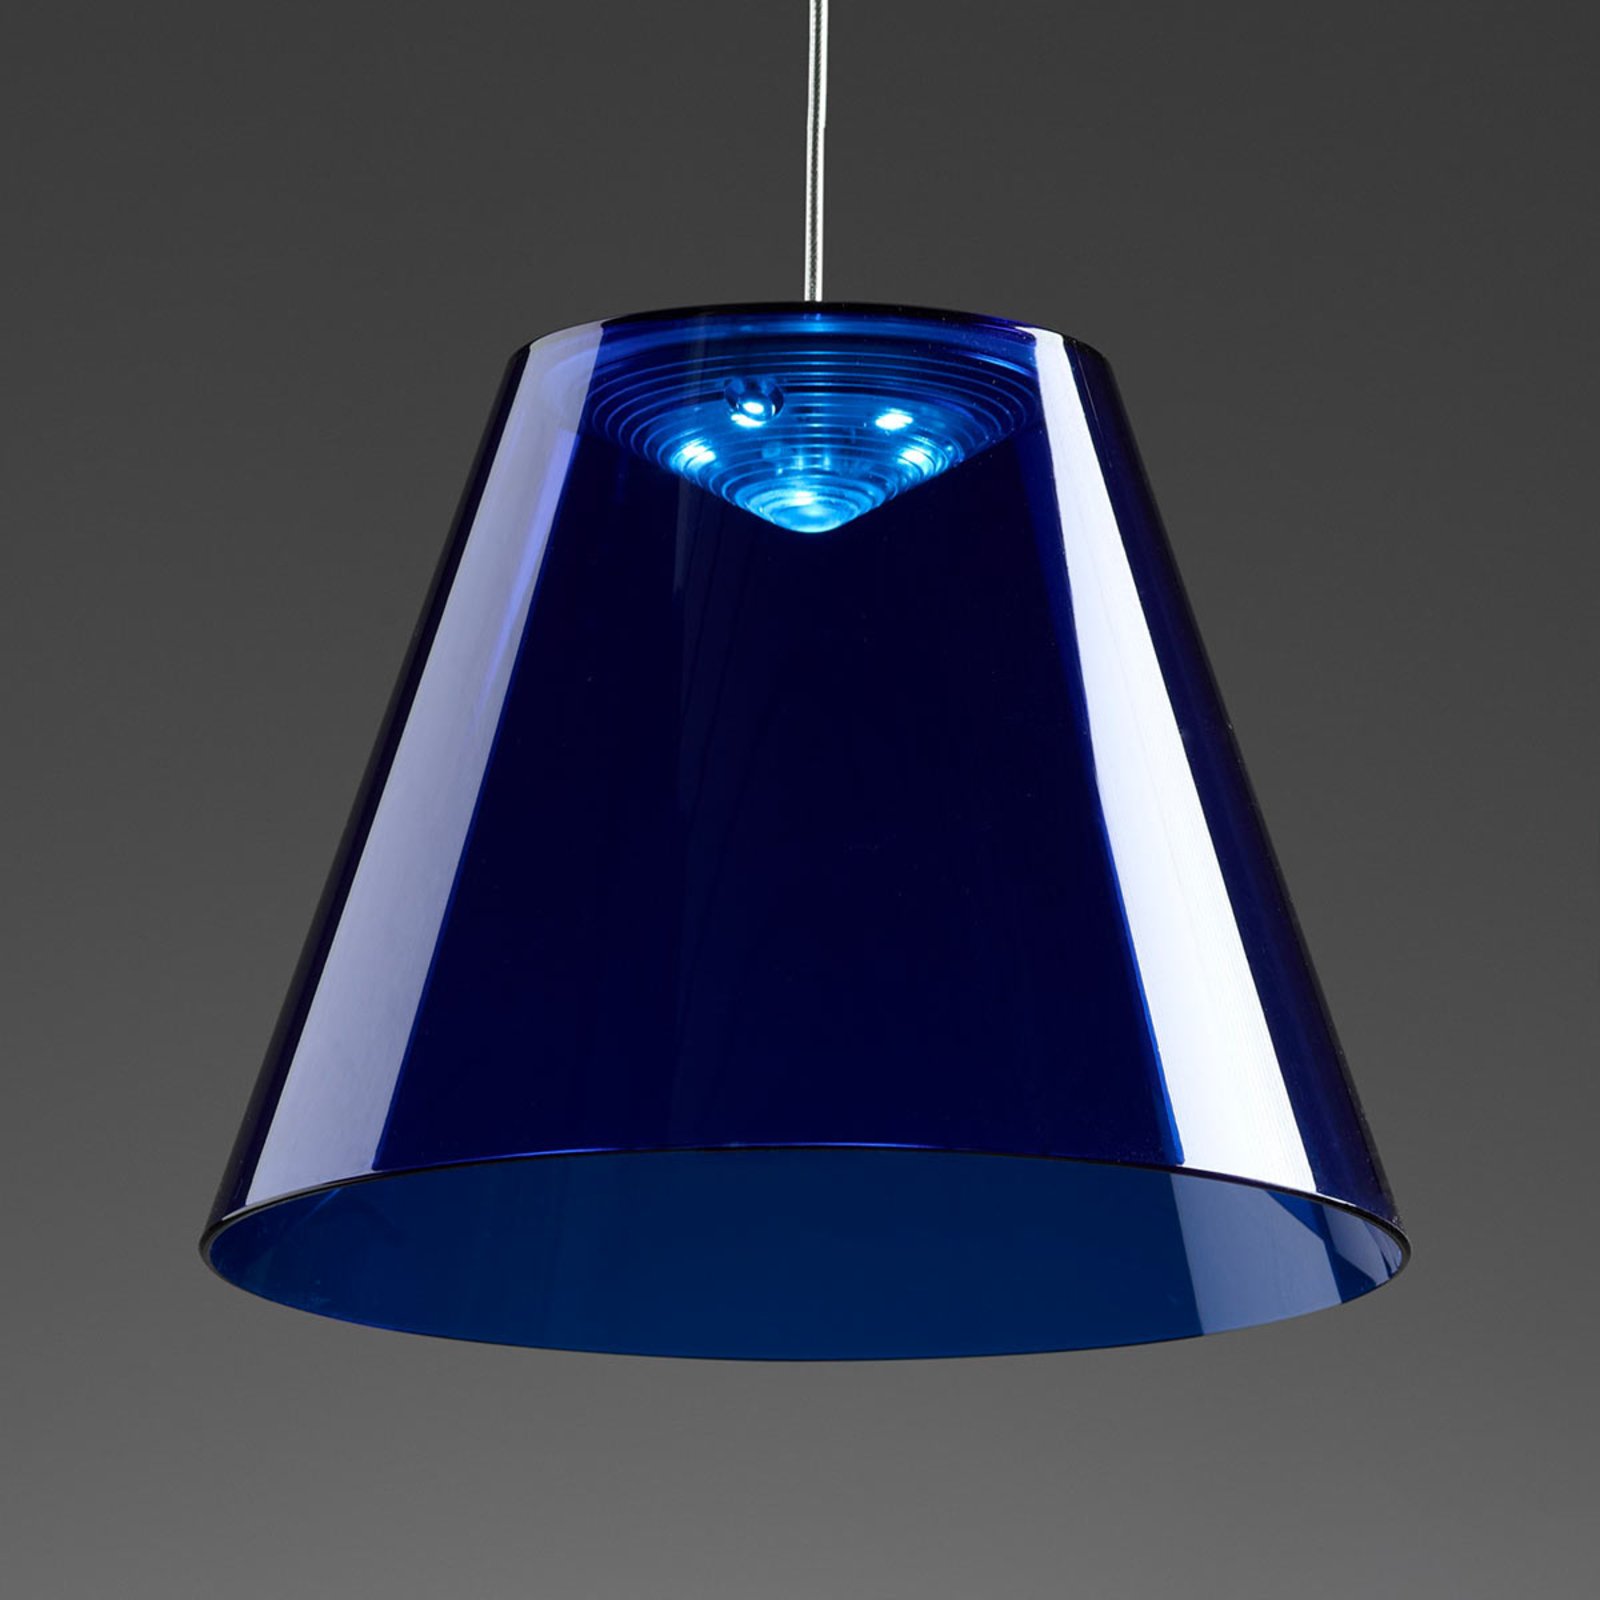 Dina - LED hanging light with a blue lampshade